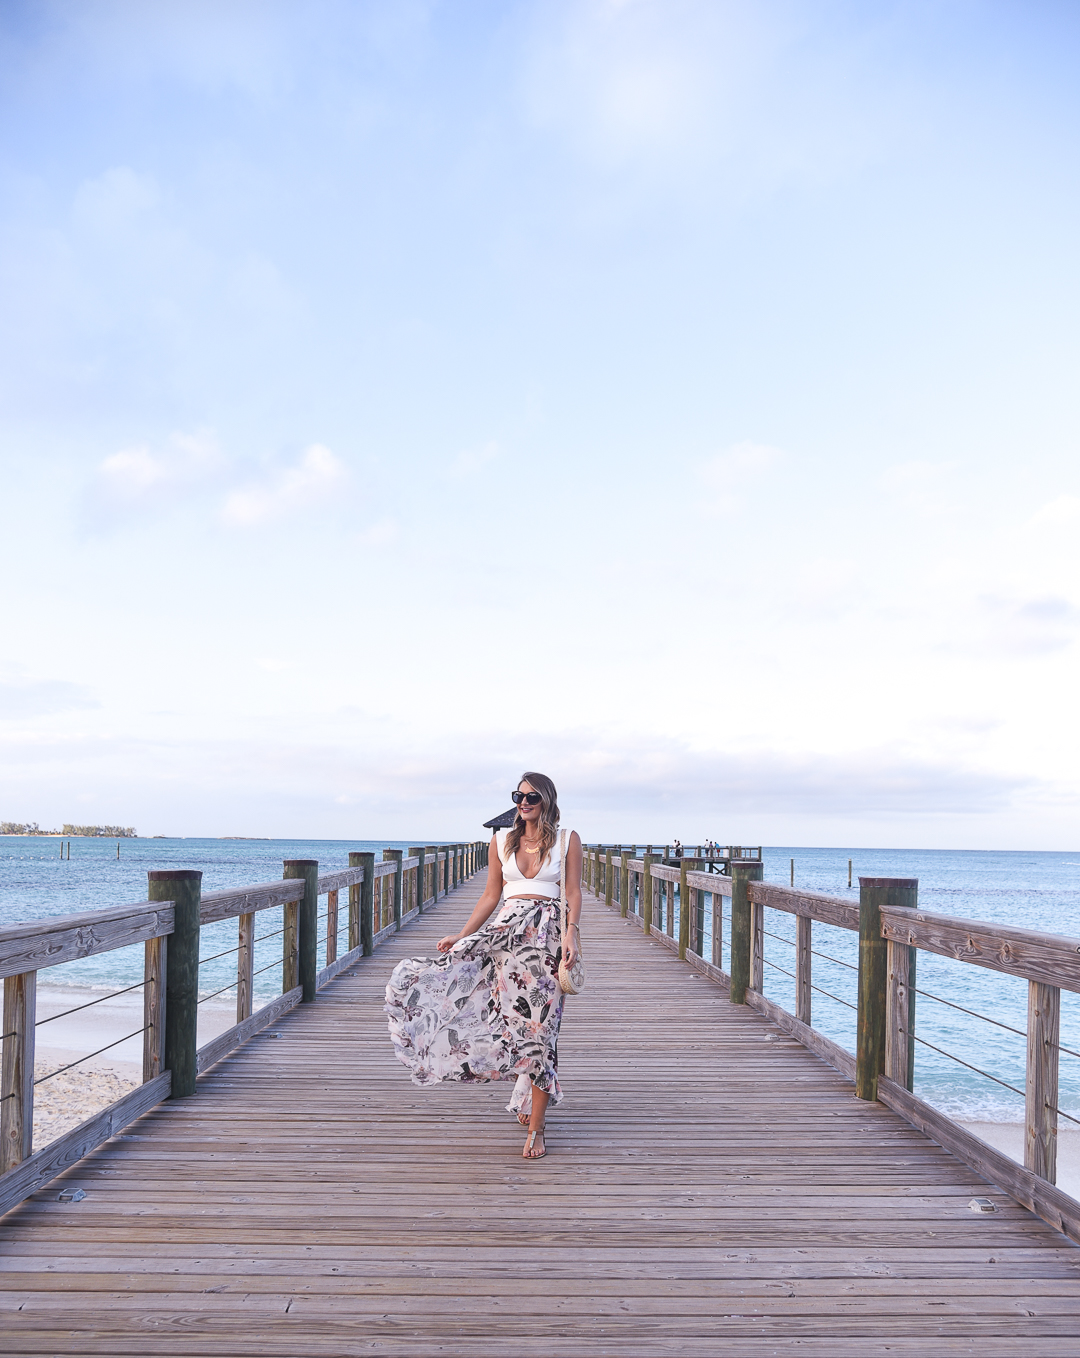 floral skirt with a white crop top - baha mar resort review in the bahamas by popular Chicago travel blogger Visions of Vogue